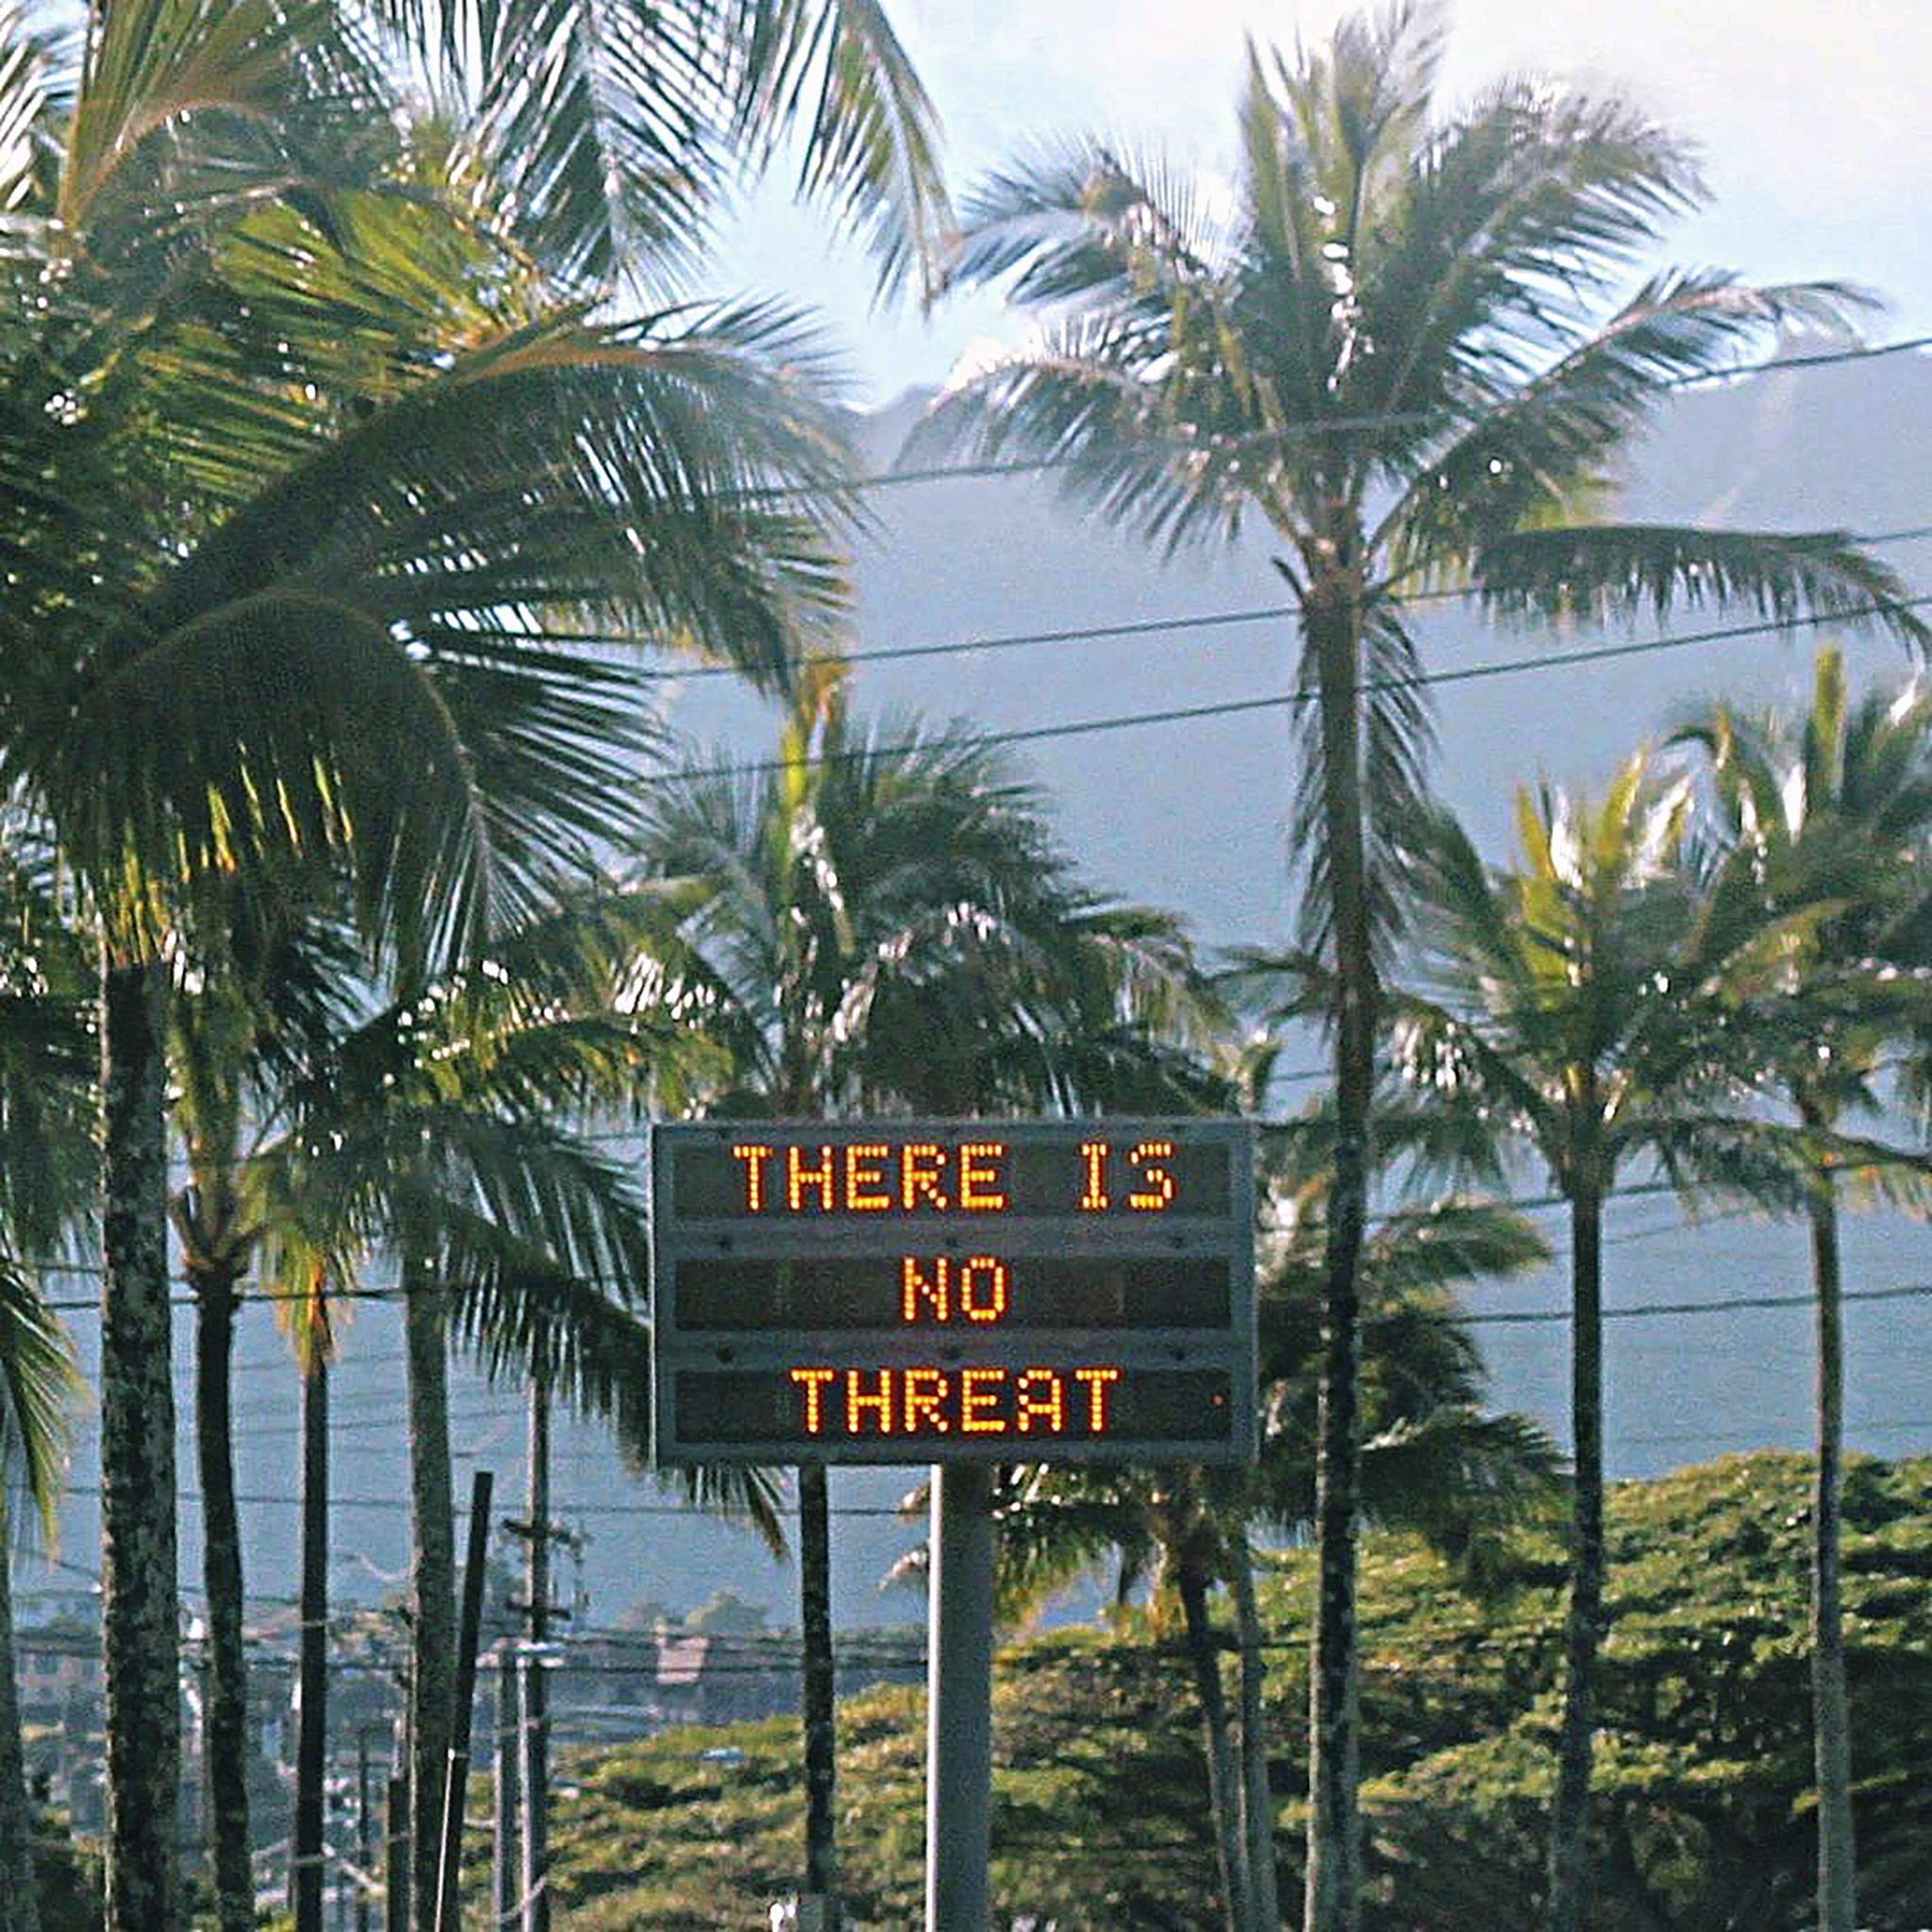 An electronic sign on the Hawaiian island of Oahu attempts to allay fears about a missile threat